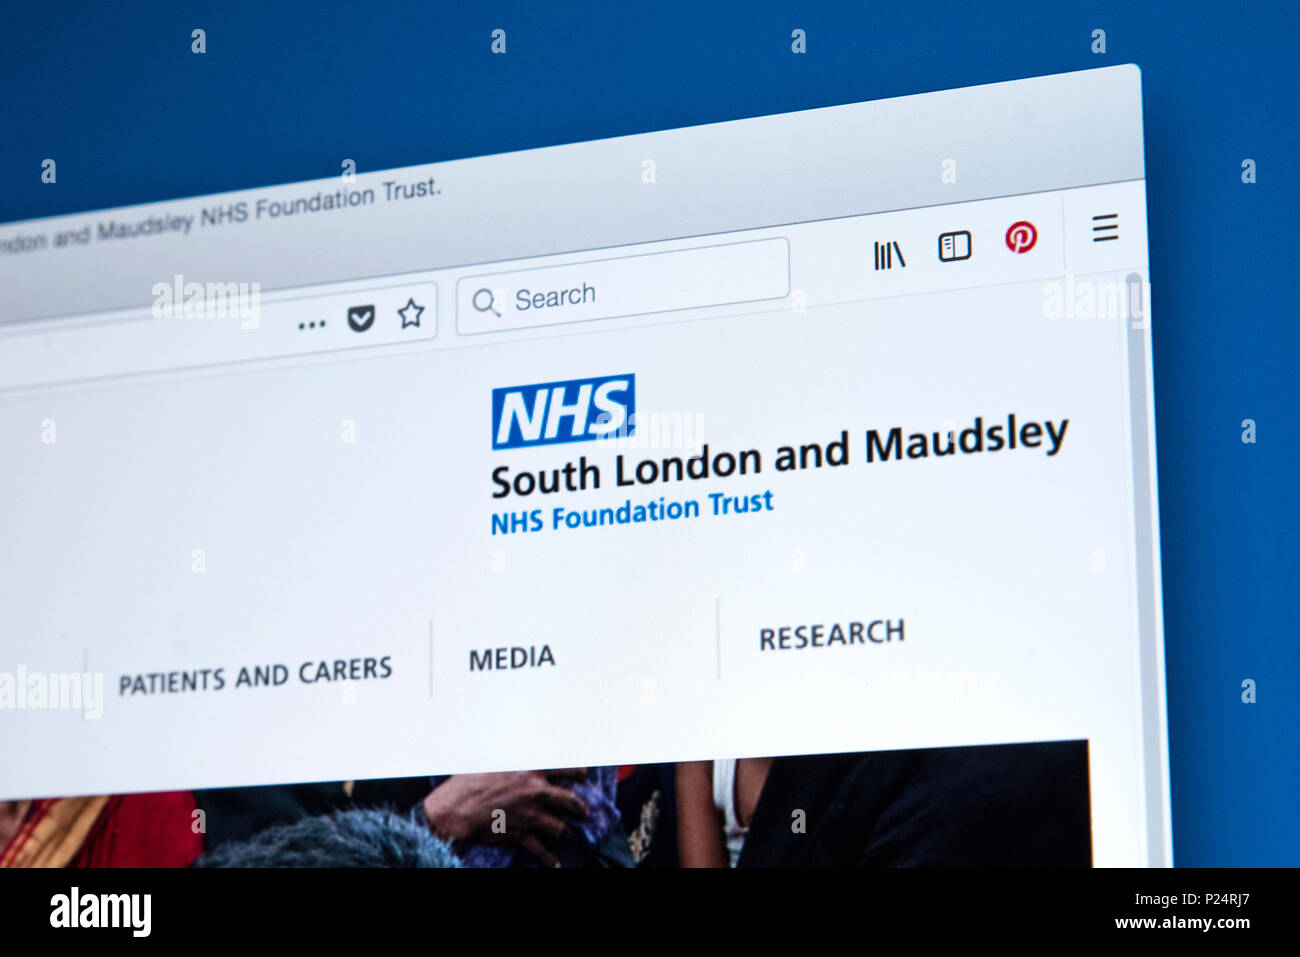 LONDON, UK - MARCH 5TH 2018: The homepage of the official website for the South London and Maudsley NHS Foundation Trust, on 5th March 2018. Stock Photo